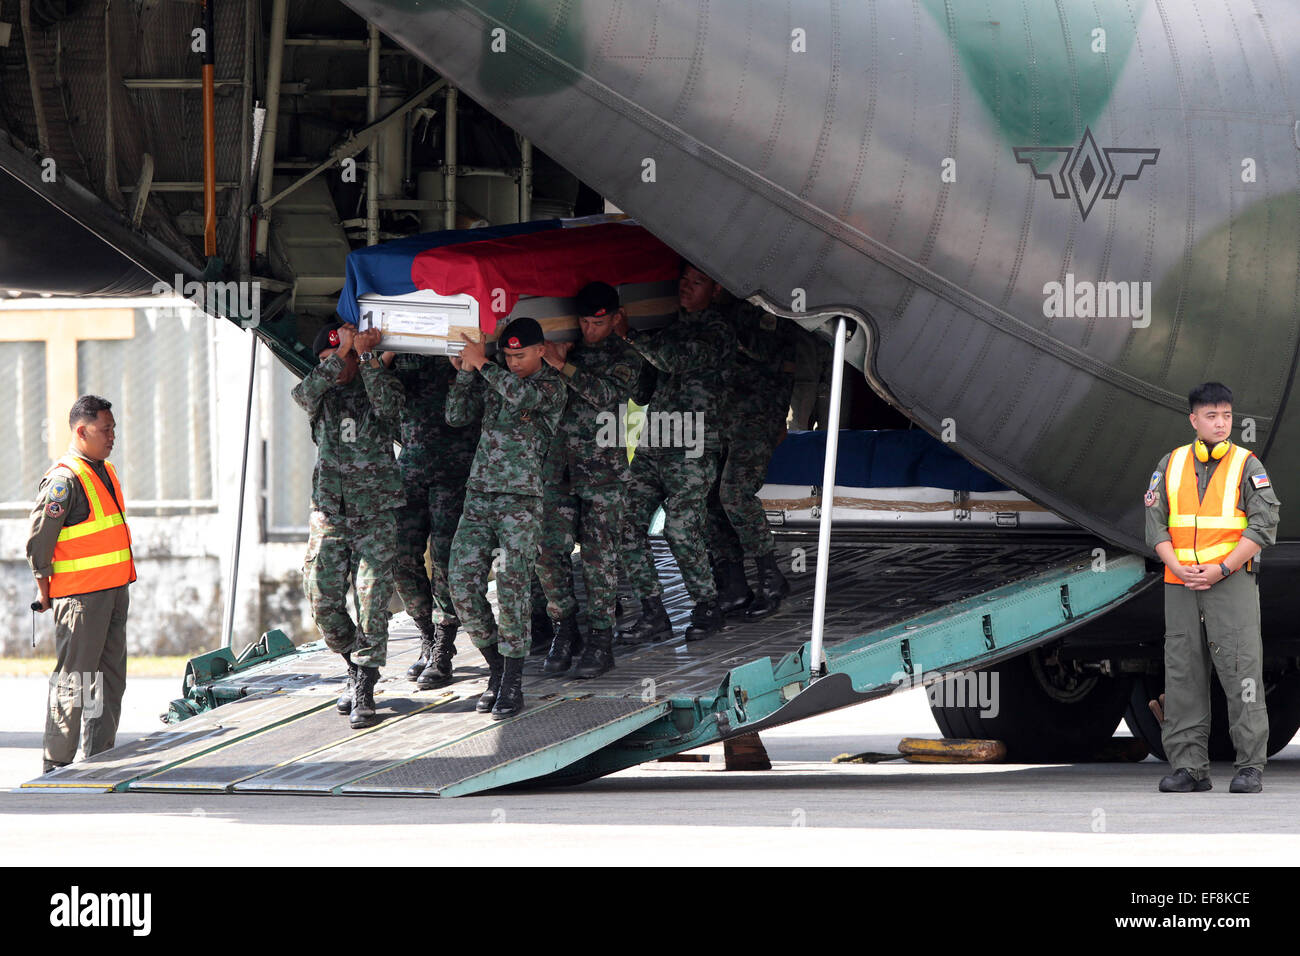 Pasay City, Philippines. 29th Jan, 2015. Members of the Philippine National Police Special Action Force (PNP-SAF) carry the casket of their fallen comrades at the Villamor Air Base in Pasay City, the Philippines, Jan. 29, 2015. Forty-four members of the PNP-SAF were killed allegedly by Moro Islamic Liberation Front and Bangsamoro Islamic Freedom Fighters members on Jan. 25 in Mamasapano, Maguindanao. Credit:  Rouelle Umali/Xinhua/Alamy Live News Stock Photo